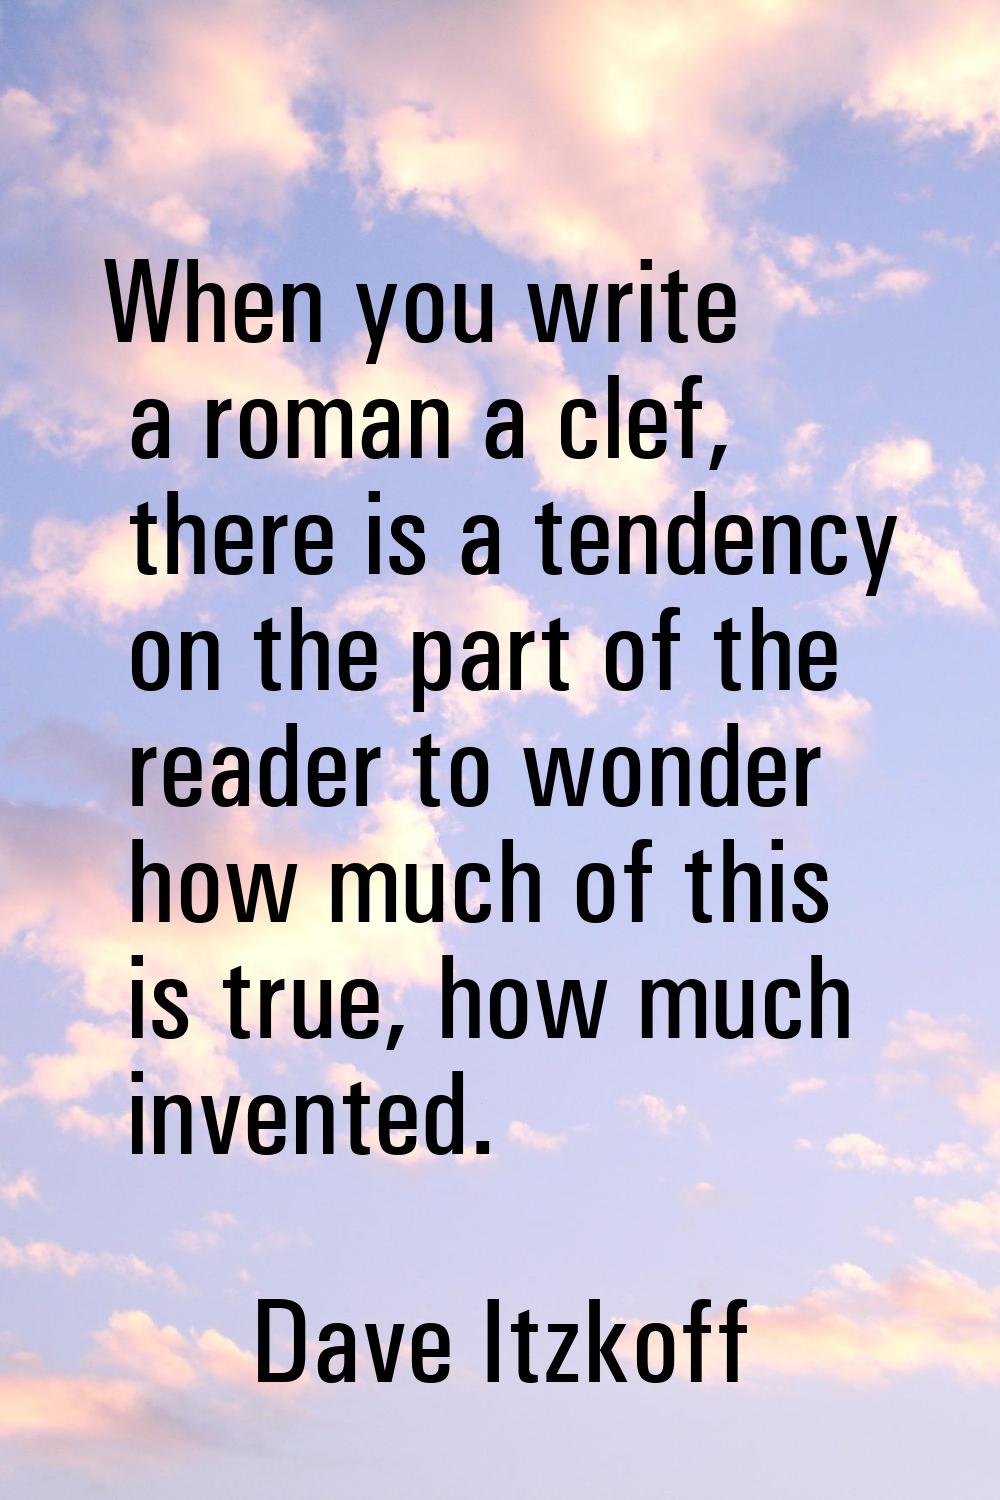 When you write a roman a clef, there is a tendency on the part of the reader to wonder how much of 